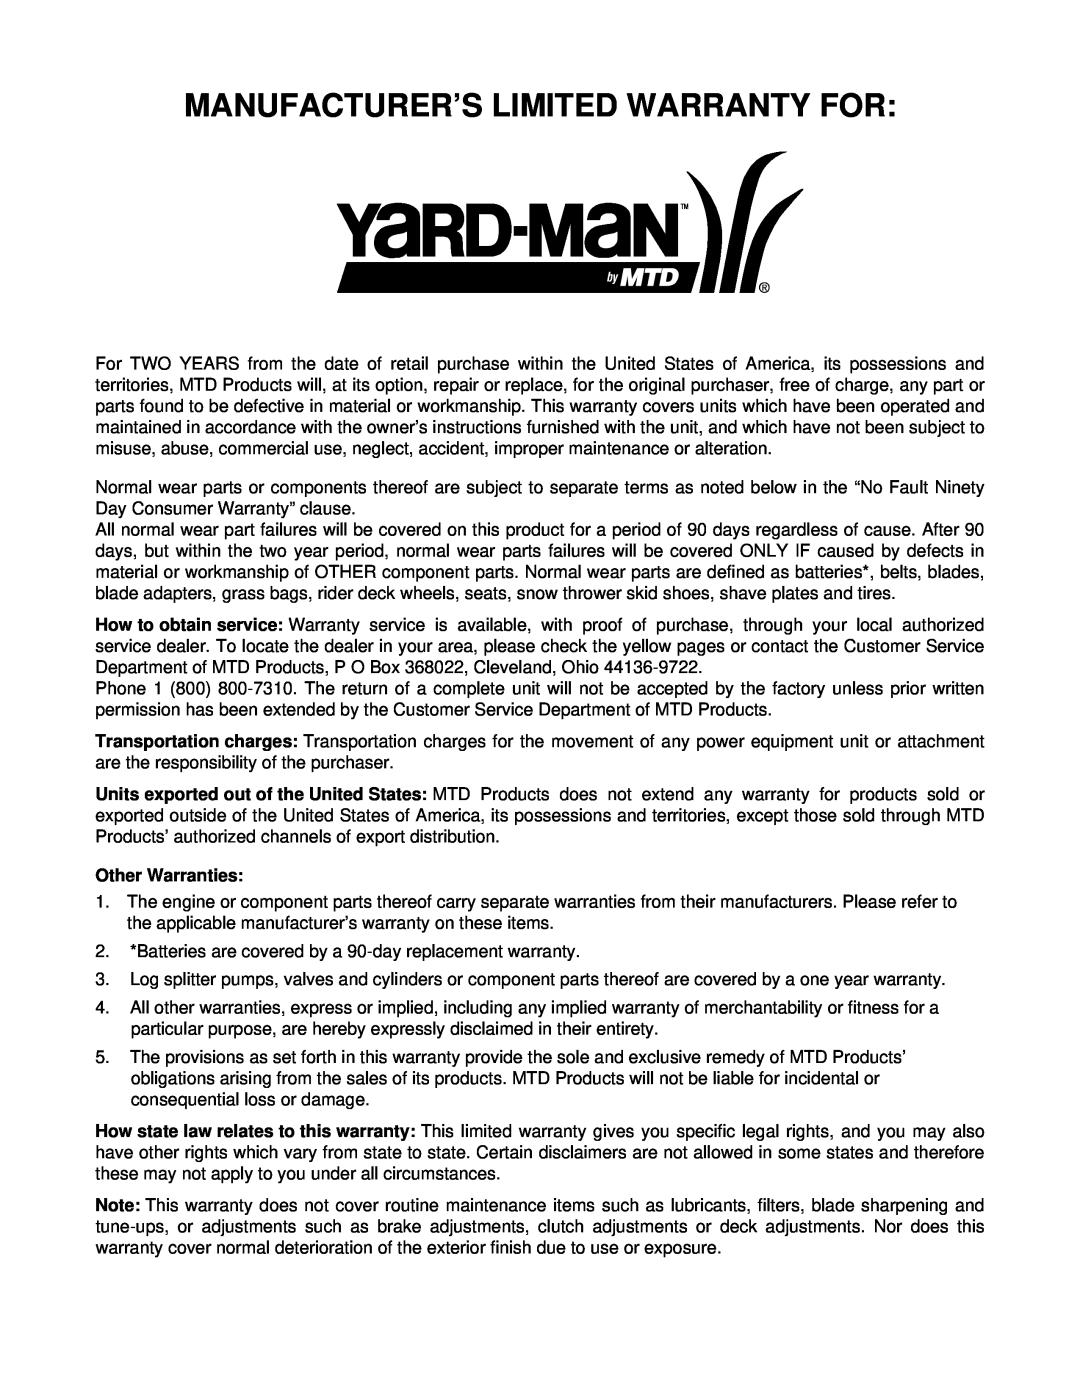 Yard-Man 247.37979 manual Manufacturer’S Limited Warranty For, Other Warranties 